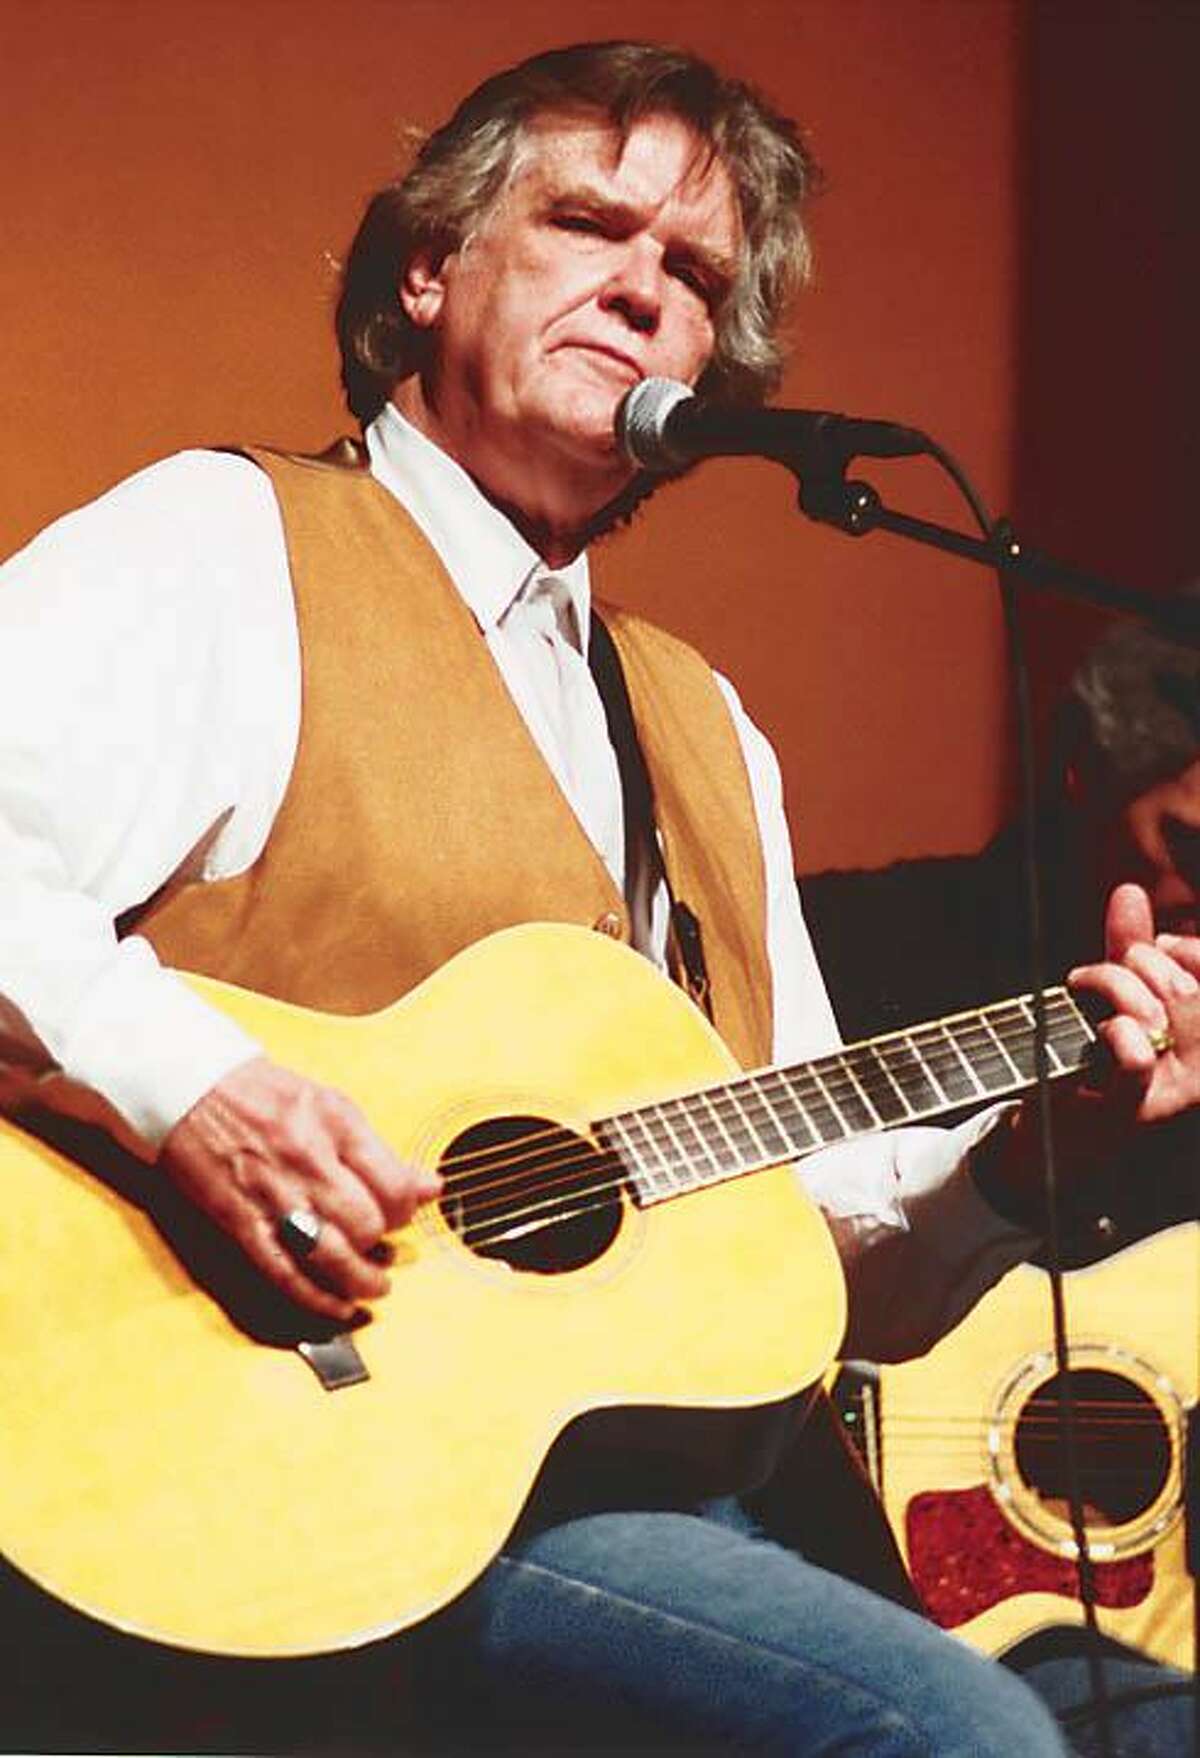 Texas singer and songwriter Guy Clark strums his guitar and entertains the sold-out crowd at the Crighton Theatre in Conroe in 2000. Clark and fellow entertainer Terry Allen appeared in the Sounds of Texas Music Series.